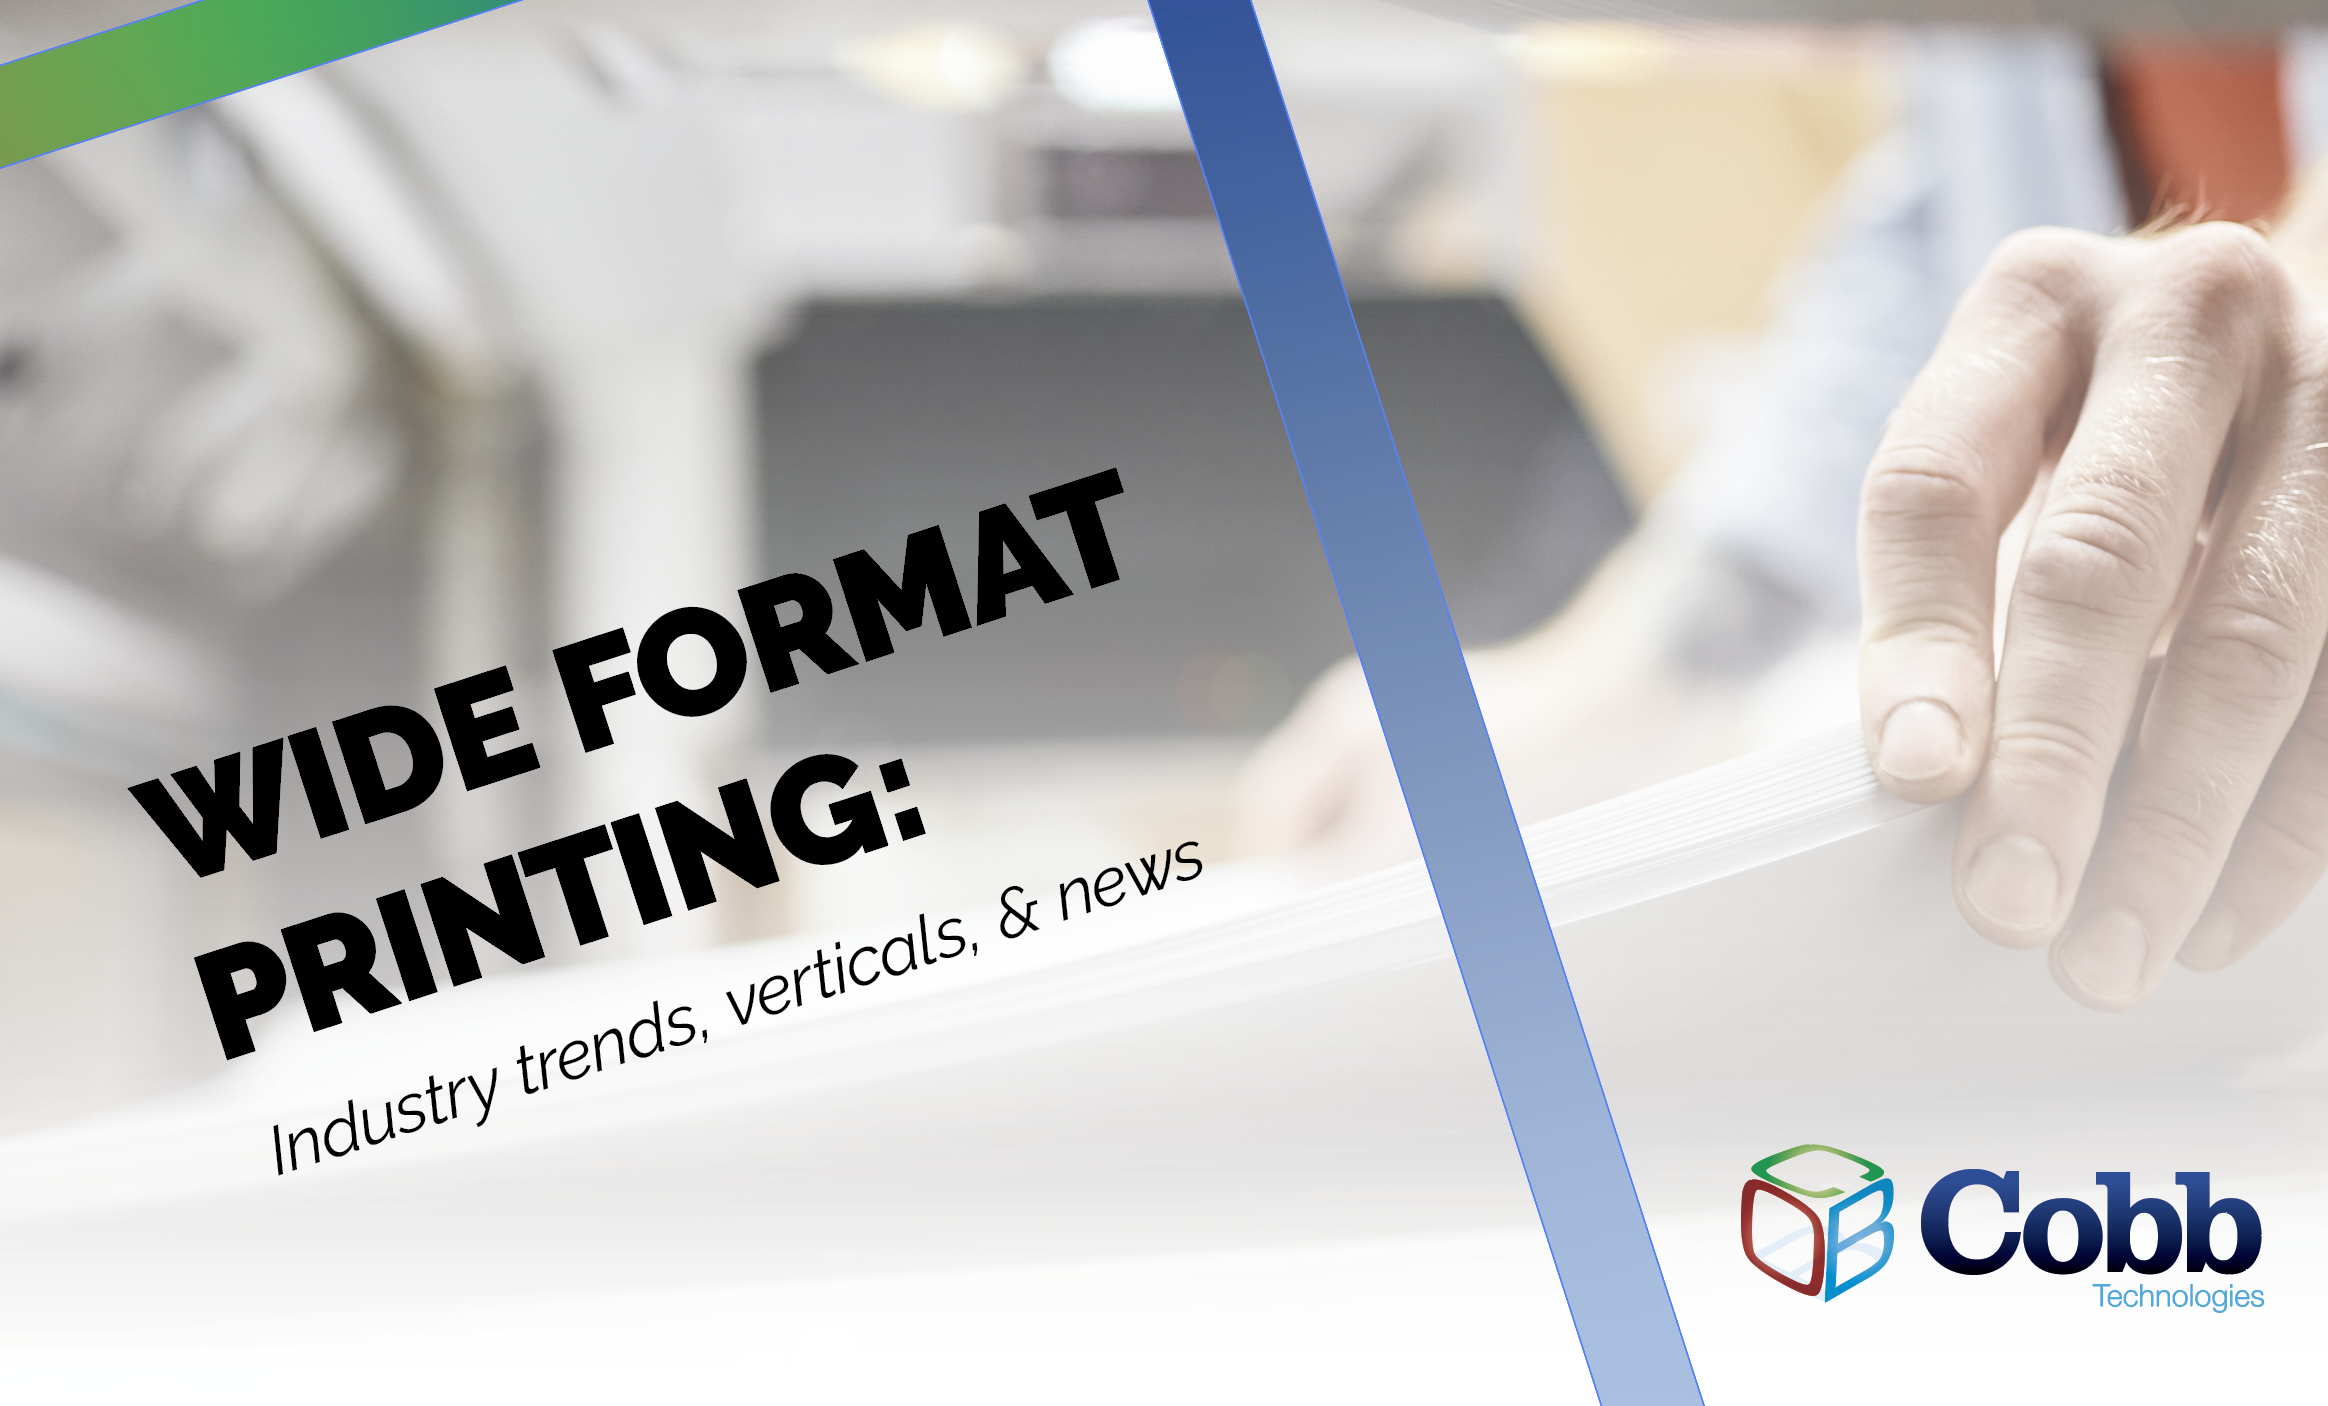 The Dynamic World of Wide Format Printing: Industry Trends, Verticals, and News